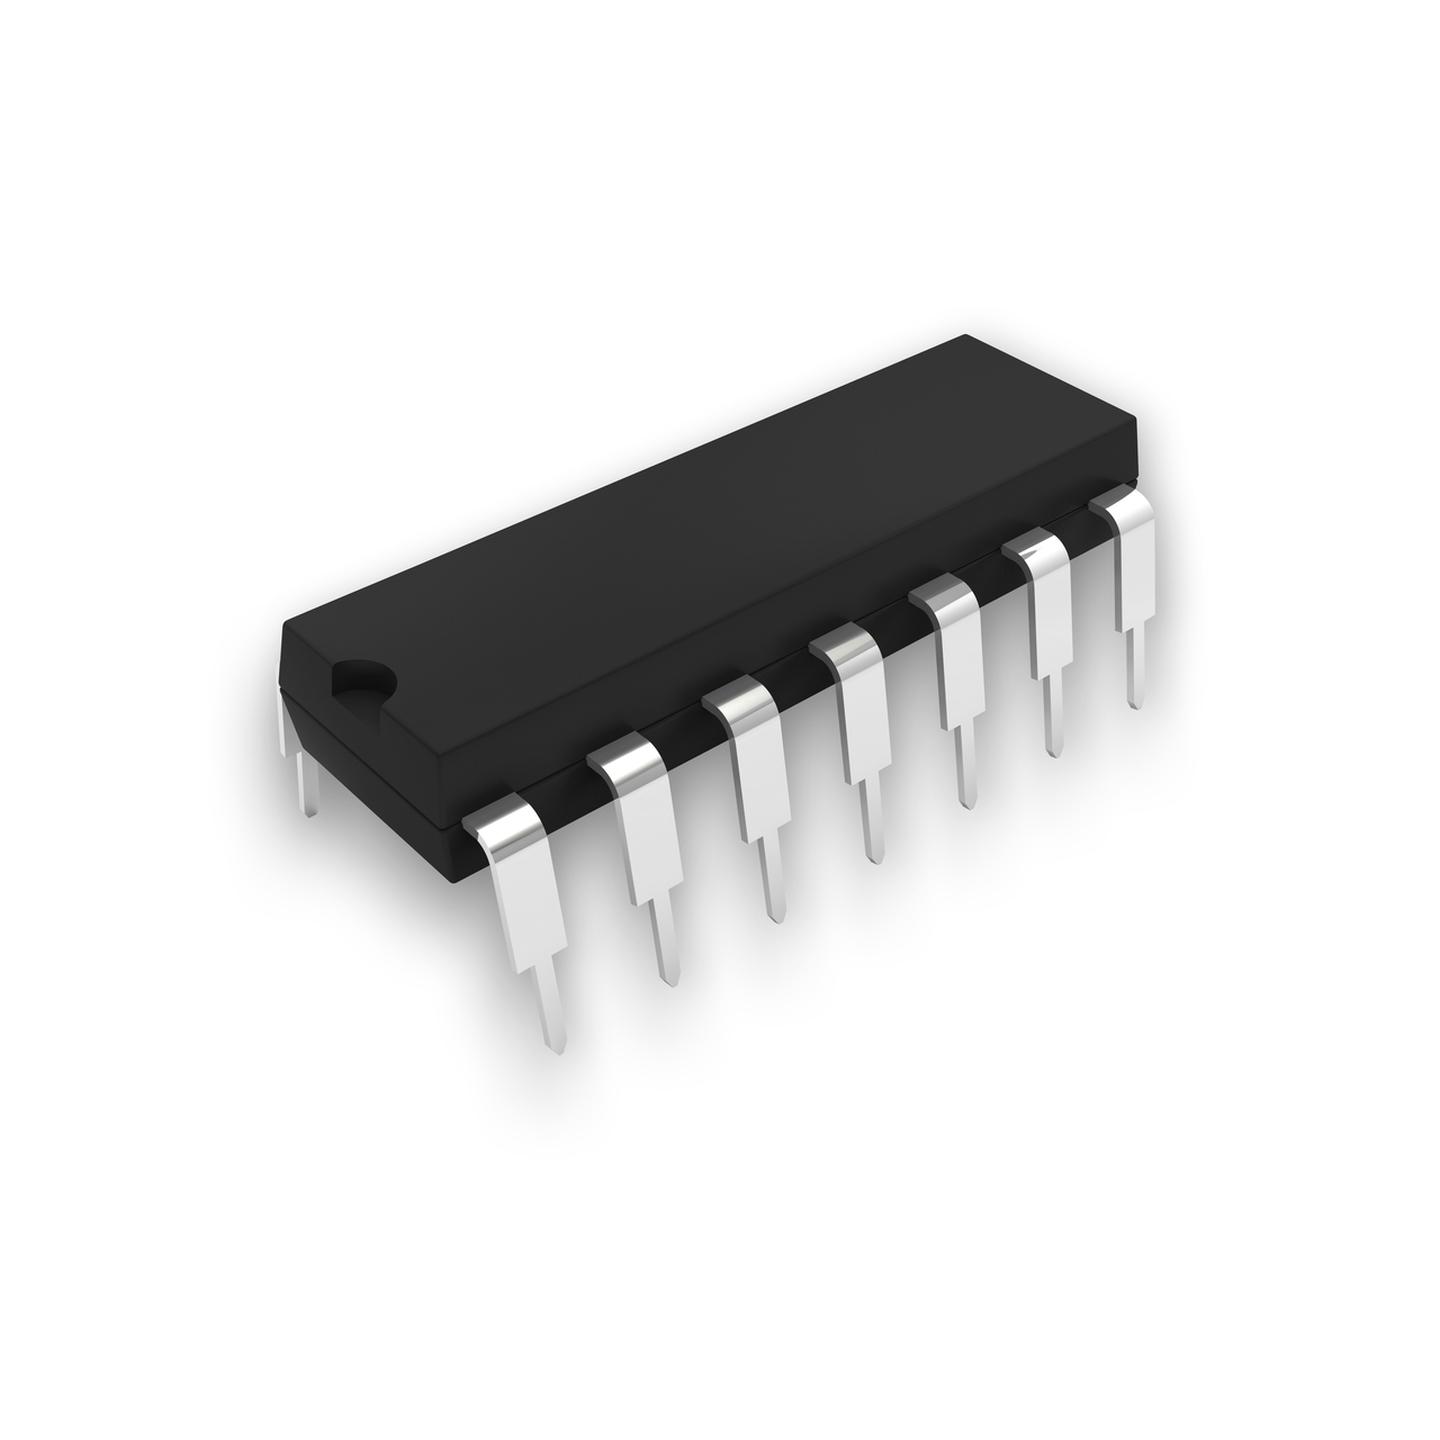 74LS90 Decade Counter IC